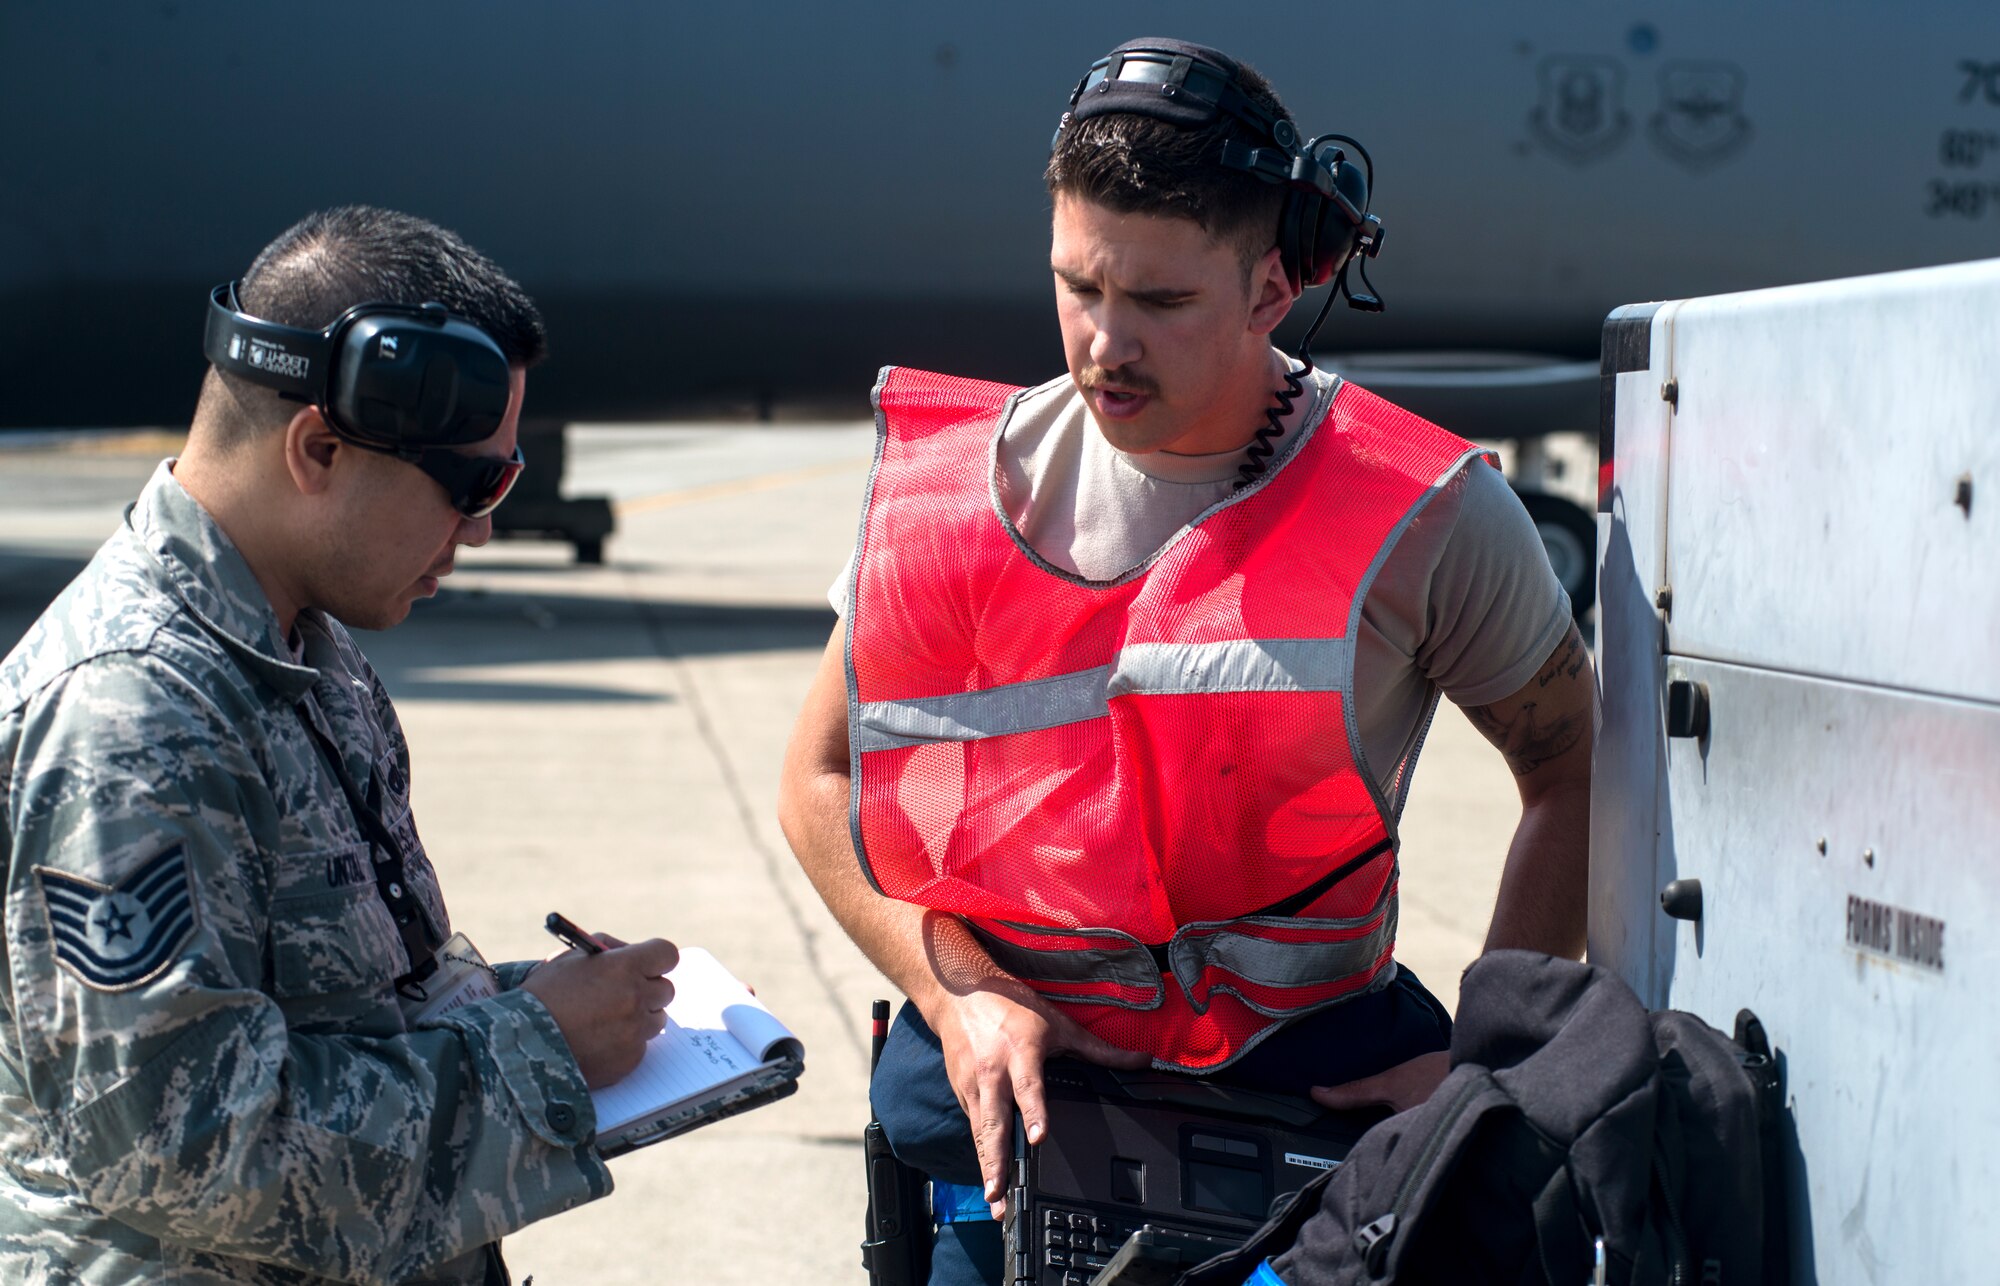 Tech. Sgt. Antonio Untal, 349th Aircraft Maintenance Squadron crew chief, debriefs Senior Airman Kyle Lake, 60th AMXS crew chief, after launching a C-5M Super Galaxy on Aug. 11, 2018, at Travis Air Force Base, Calif. The 349th and 60th AMXS work together to launch aircraft in a seemless active duty and Air Force Reserve integration.